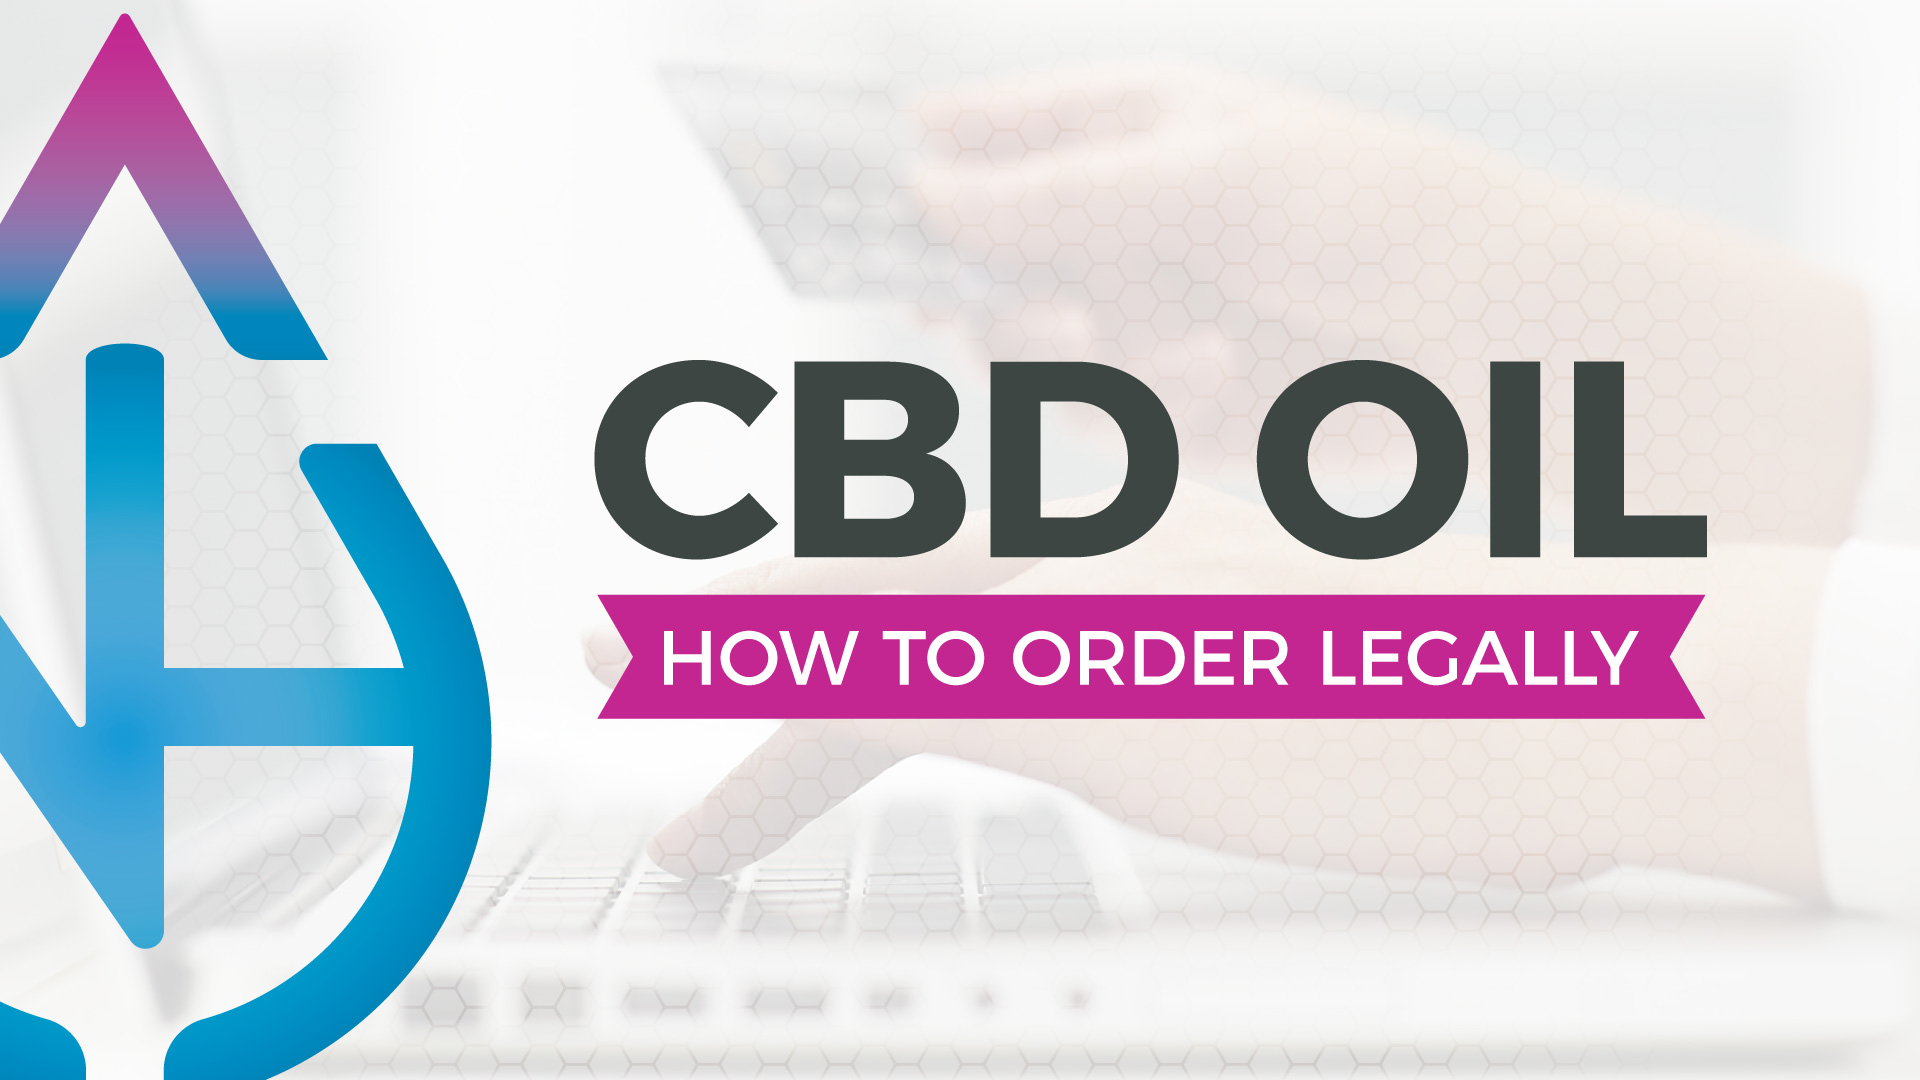 Is CBD Legal to Order Online?